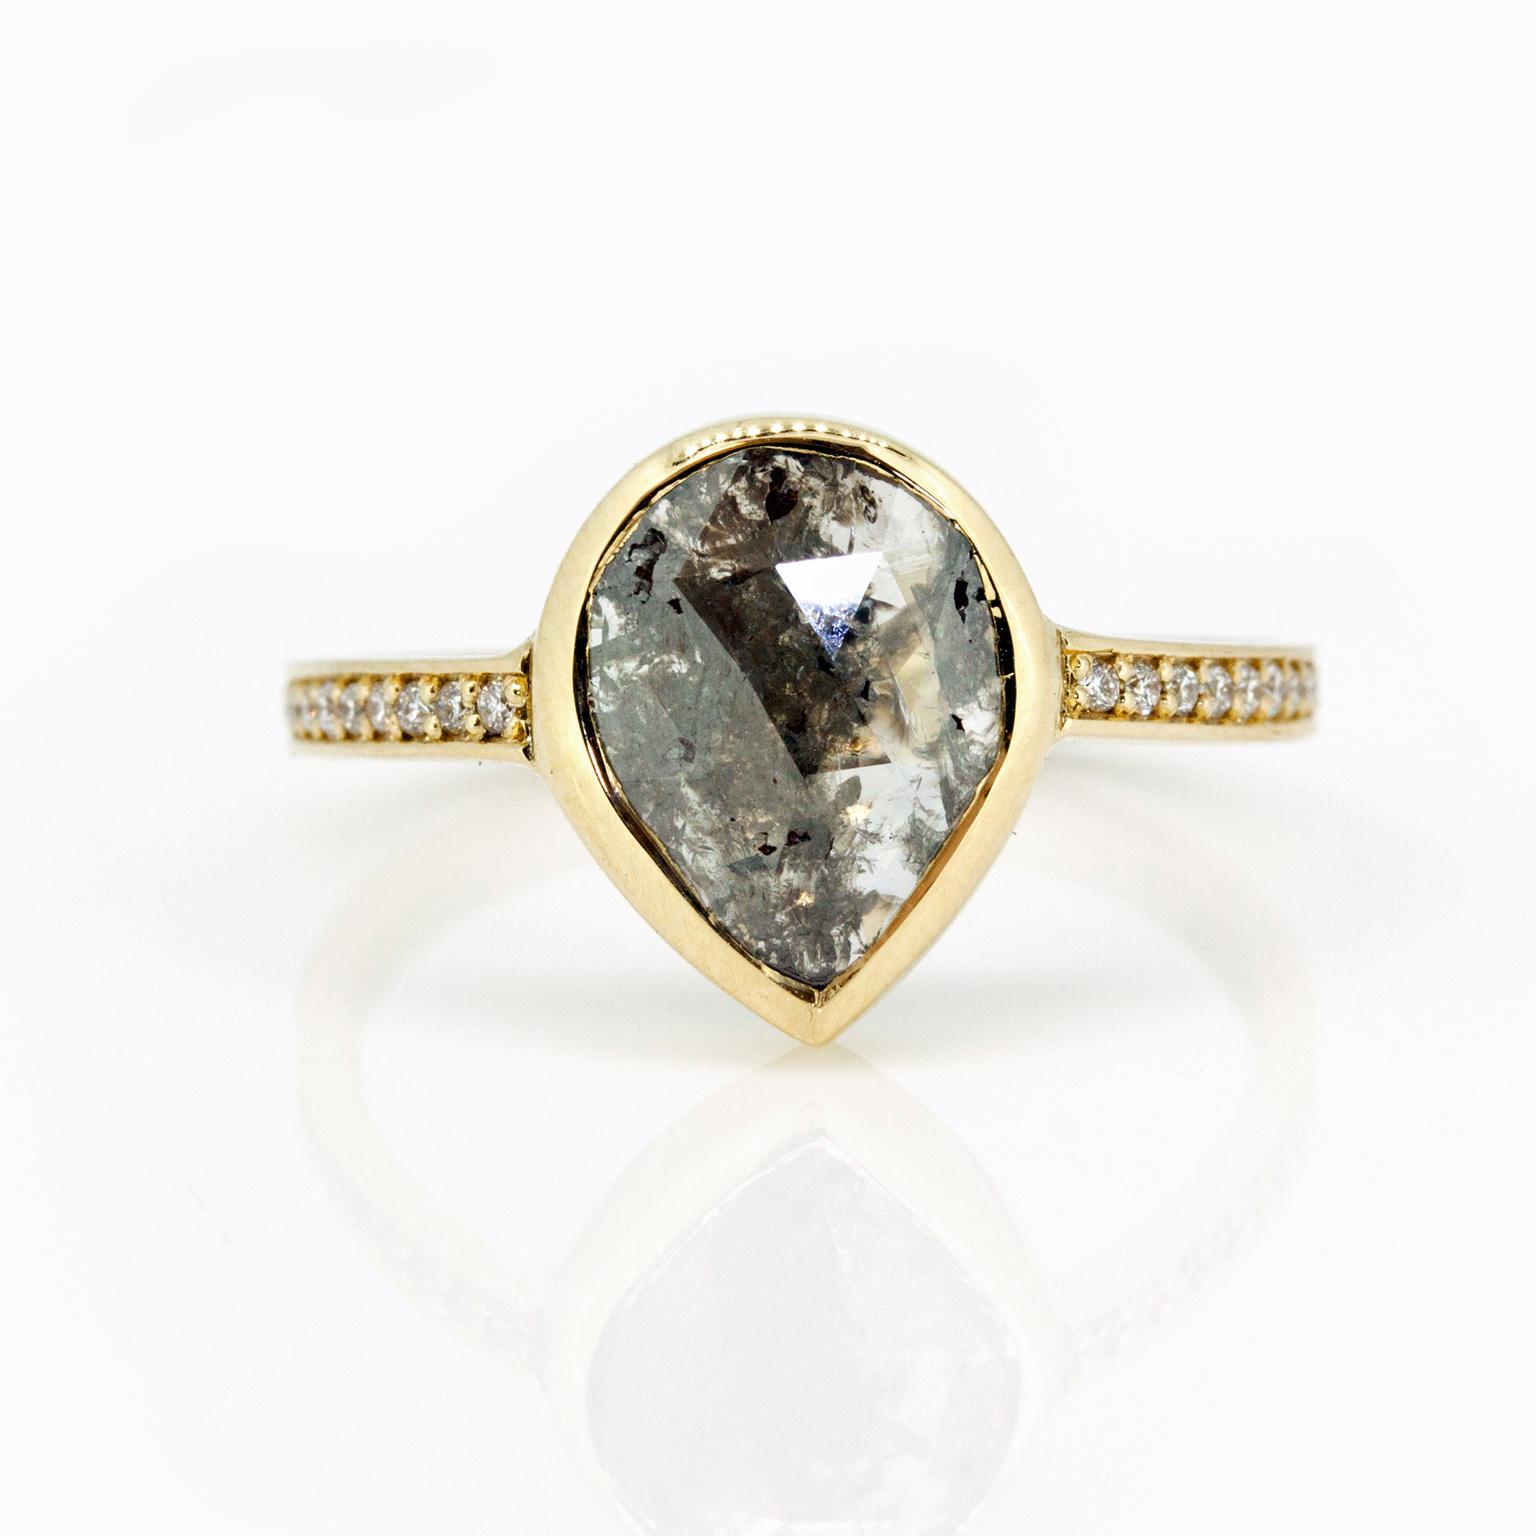 Sorrel Bay engagement ring in Fairtrade gold